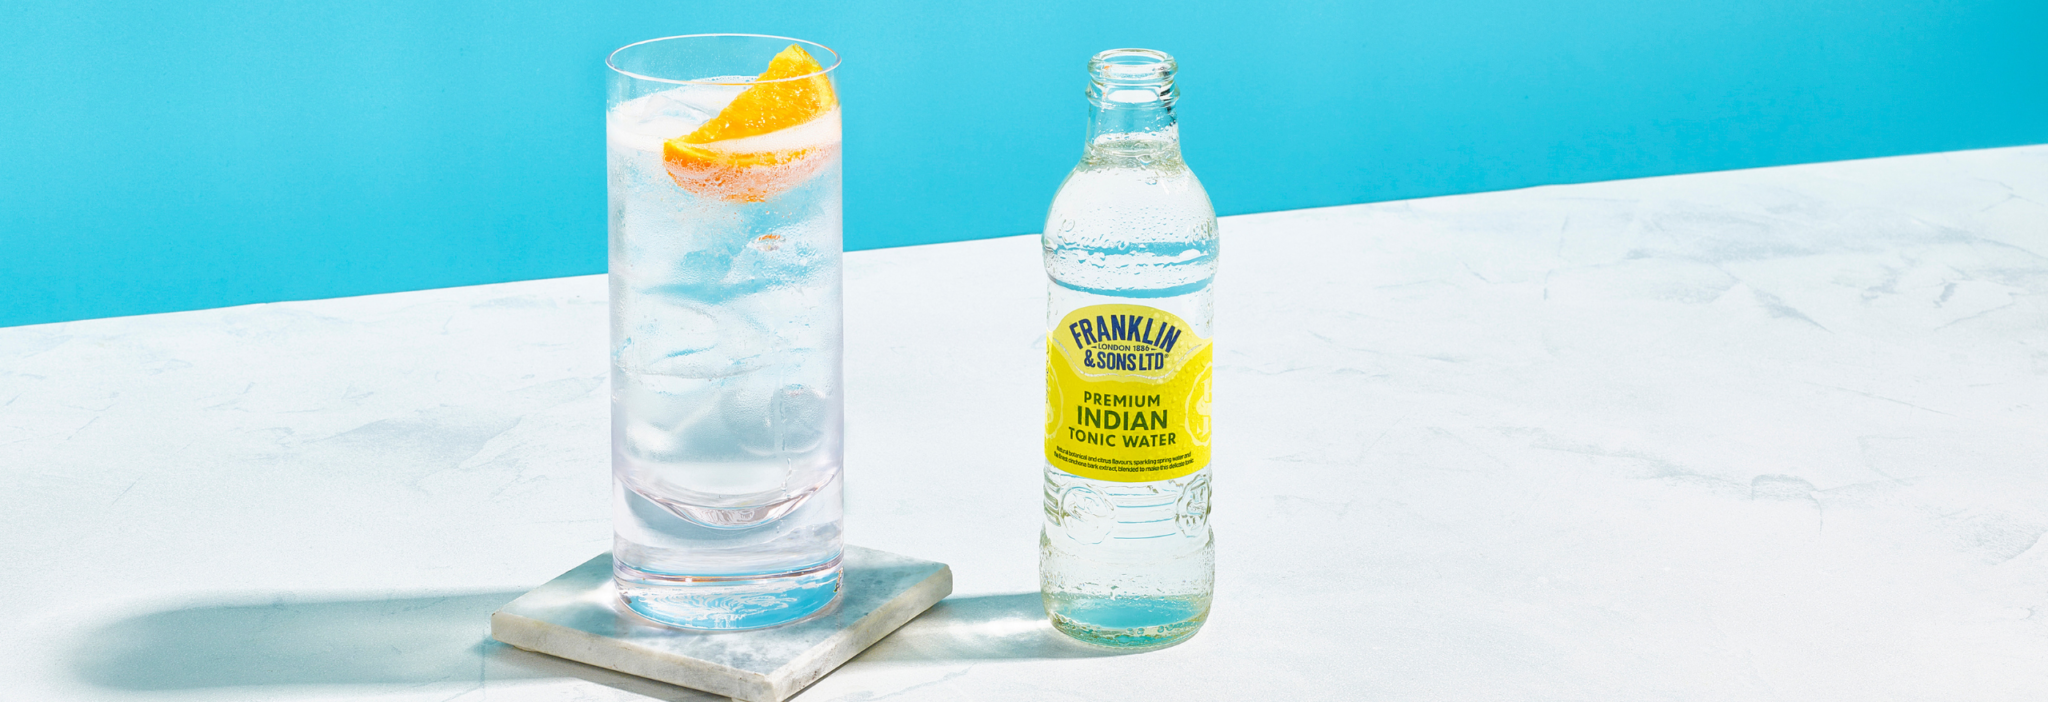 The London G&T cocktail recipe | Franklin & Sons